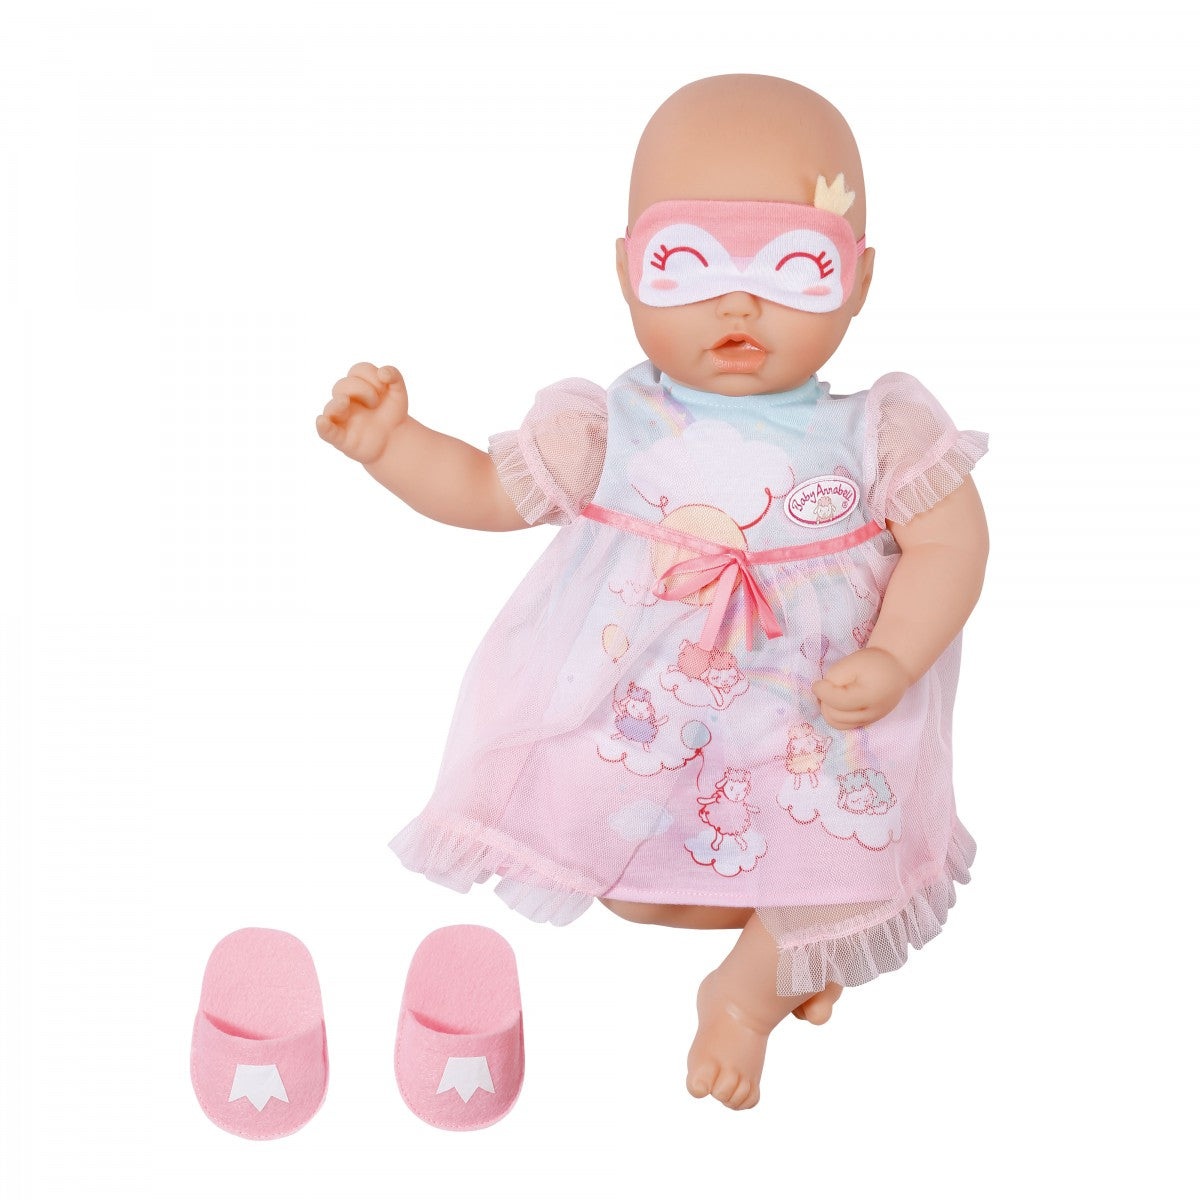 Baby Annabell Sweetdreams Gown 43cm